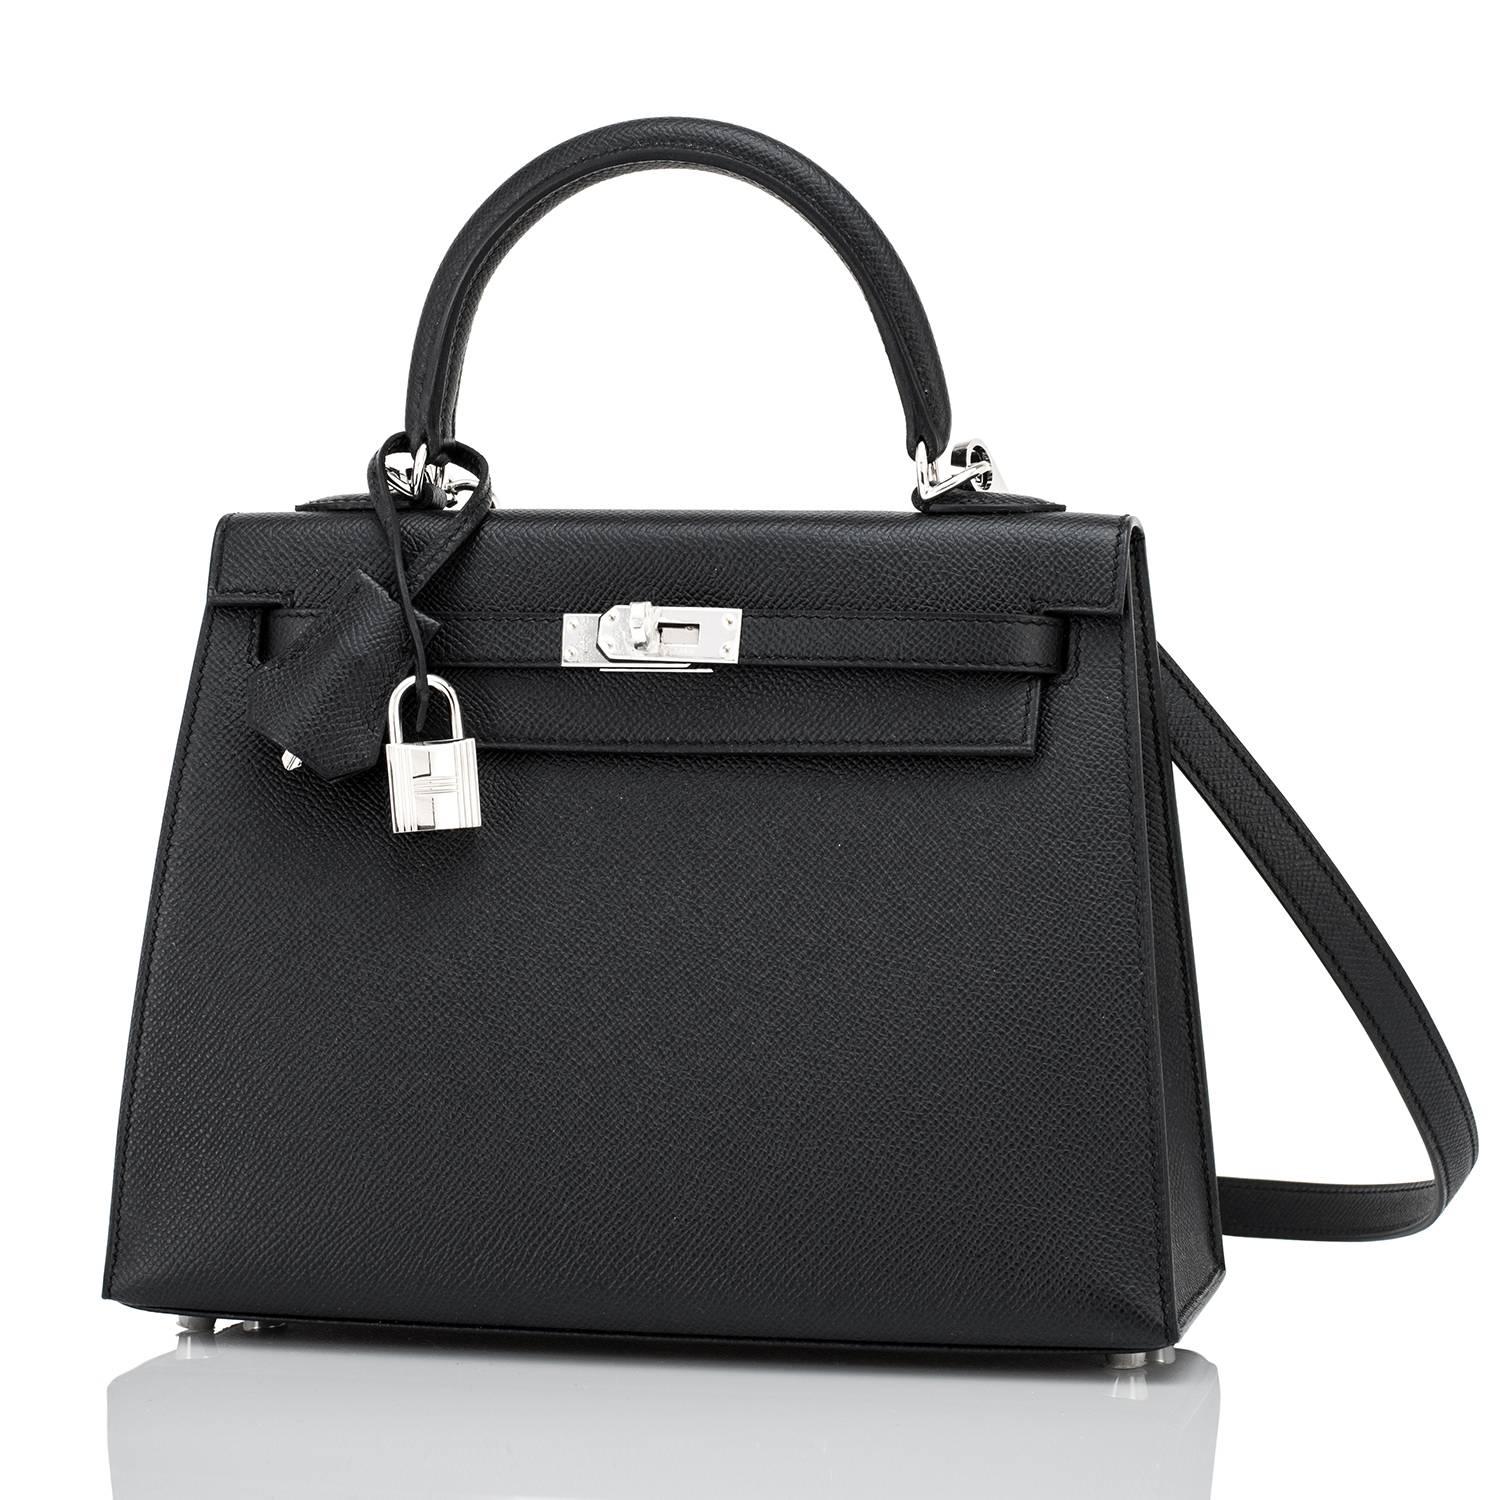 Uber Chic Hermes Jet Black 25cm Kelly Epsom Sellier Palladium Y Stamp, 2020
Don't miss this- the only Y Stamp Black Kelly 25 with Palladium in the market right now!
Brand New in Box. Store Fresh. Pristine Condition (with plastic on hardware).
Just